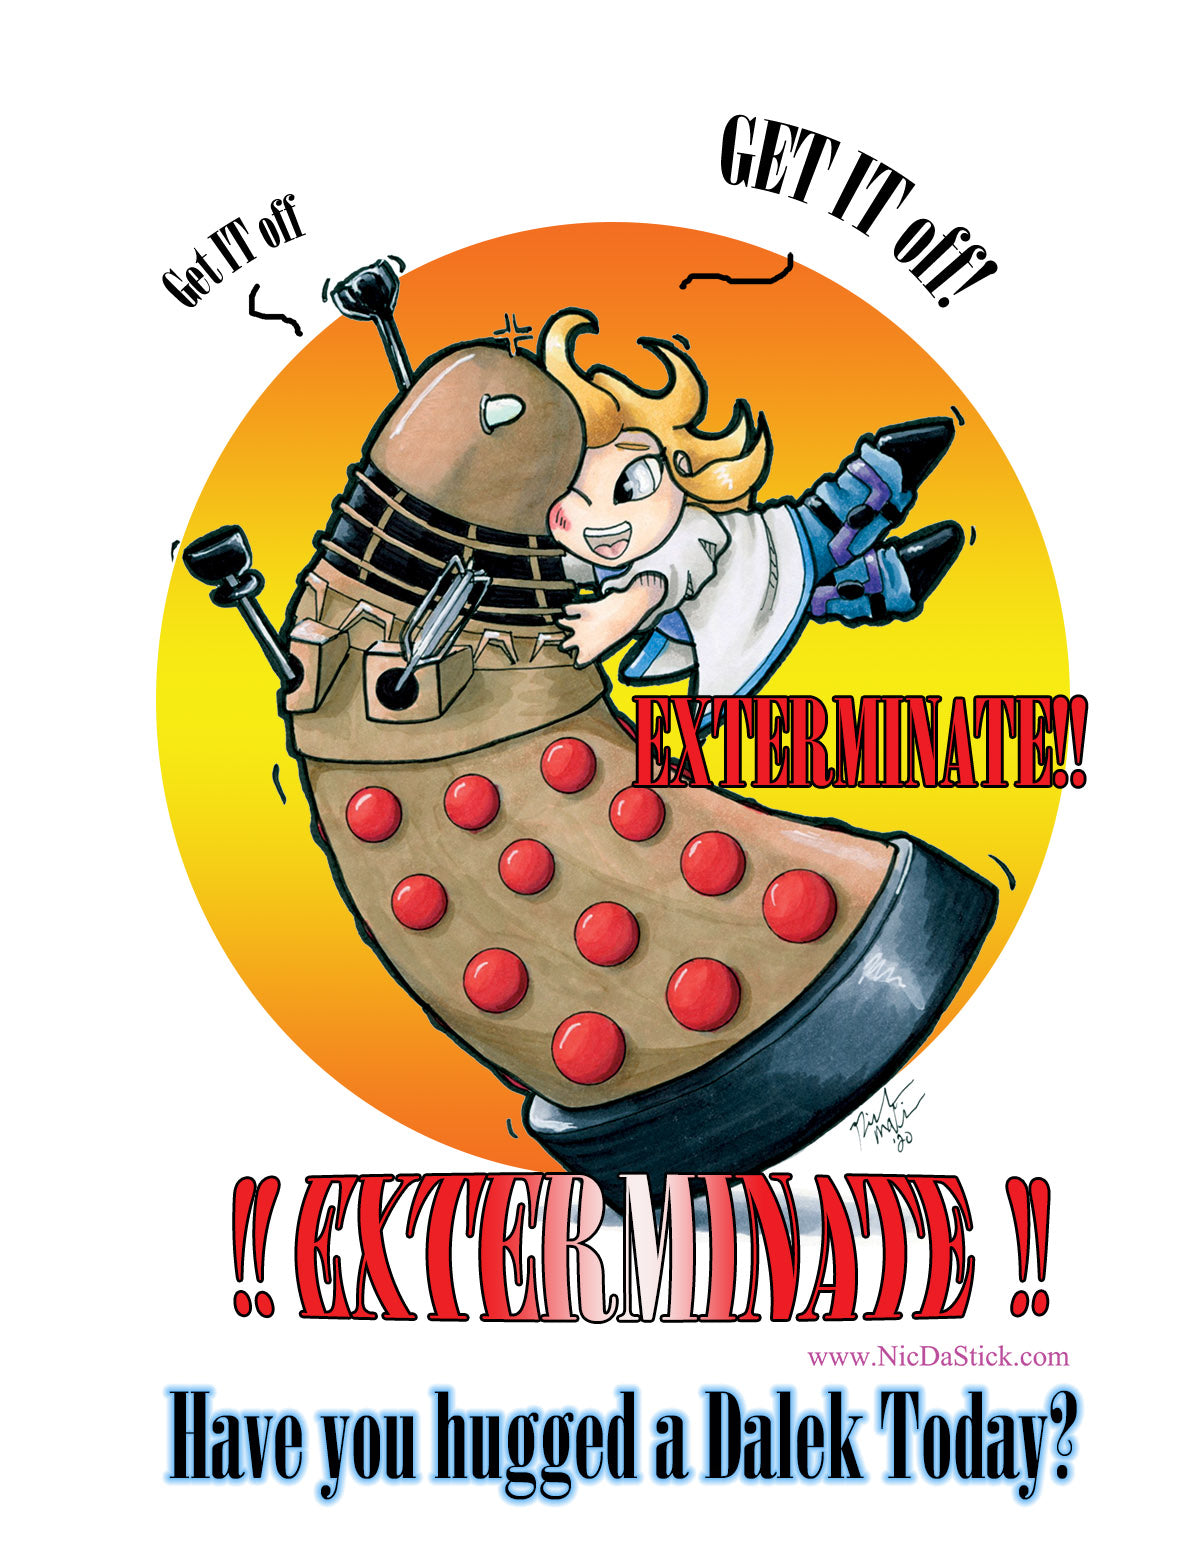 Have you Hugged a Dalek Today?